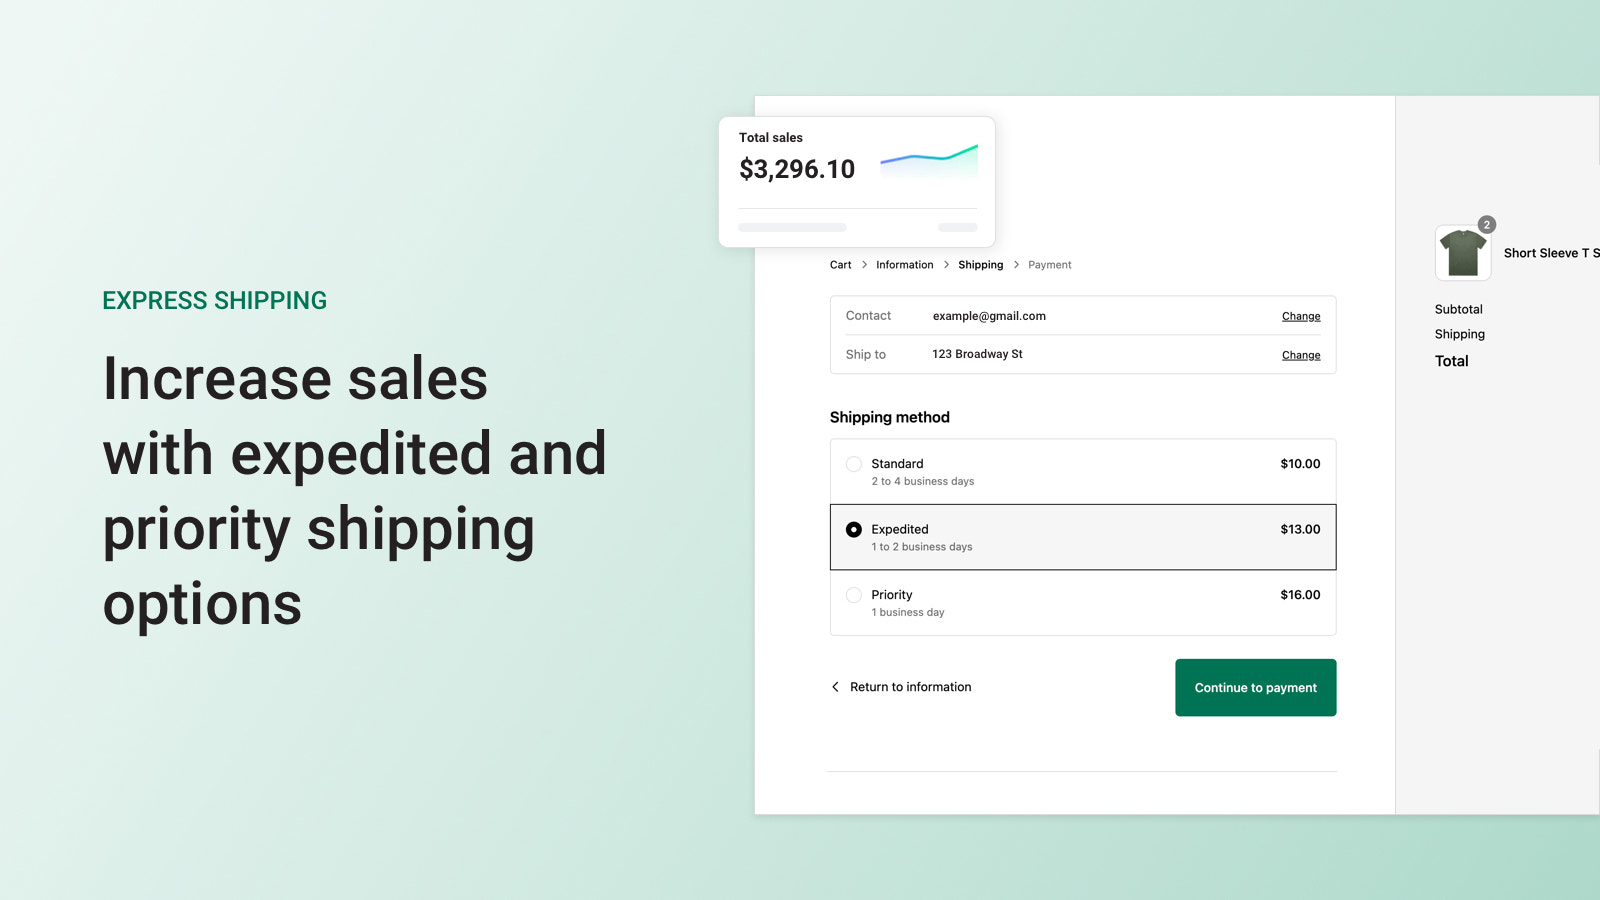 Increase sales with expedited and priority shipping options